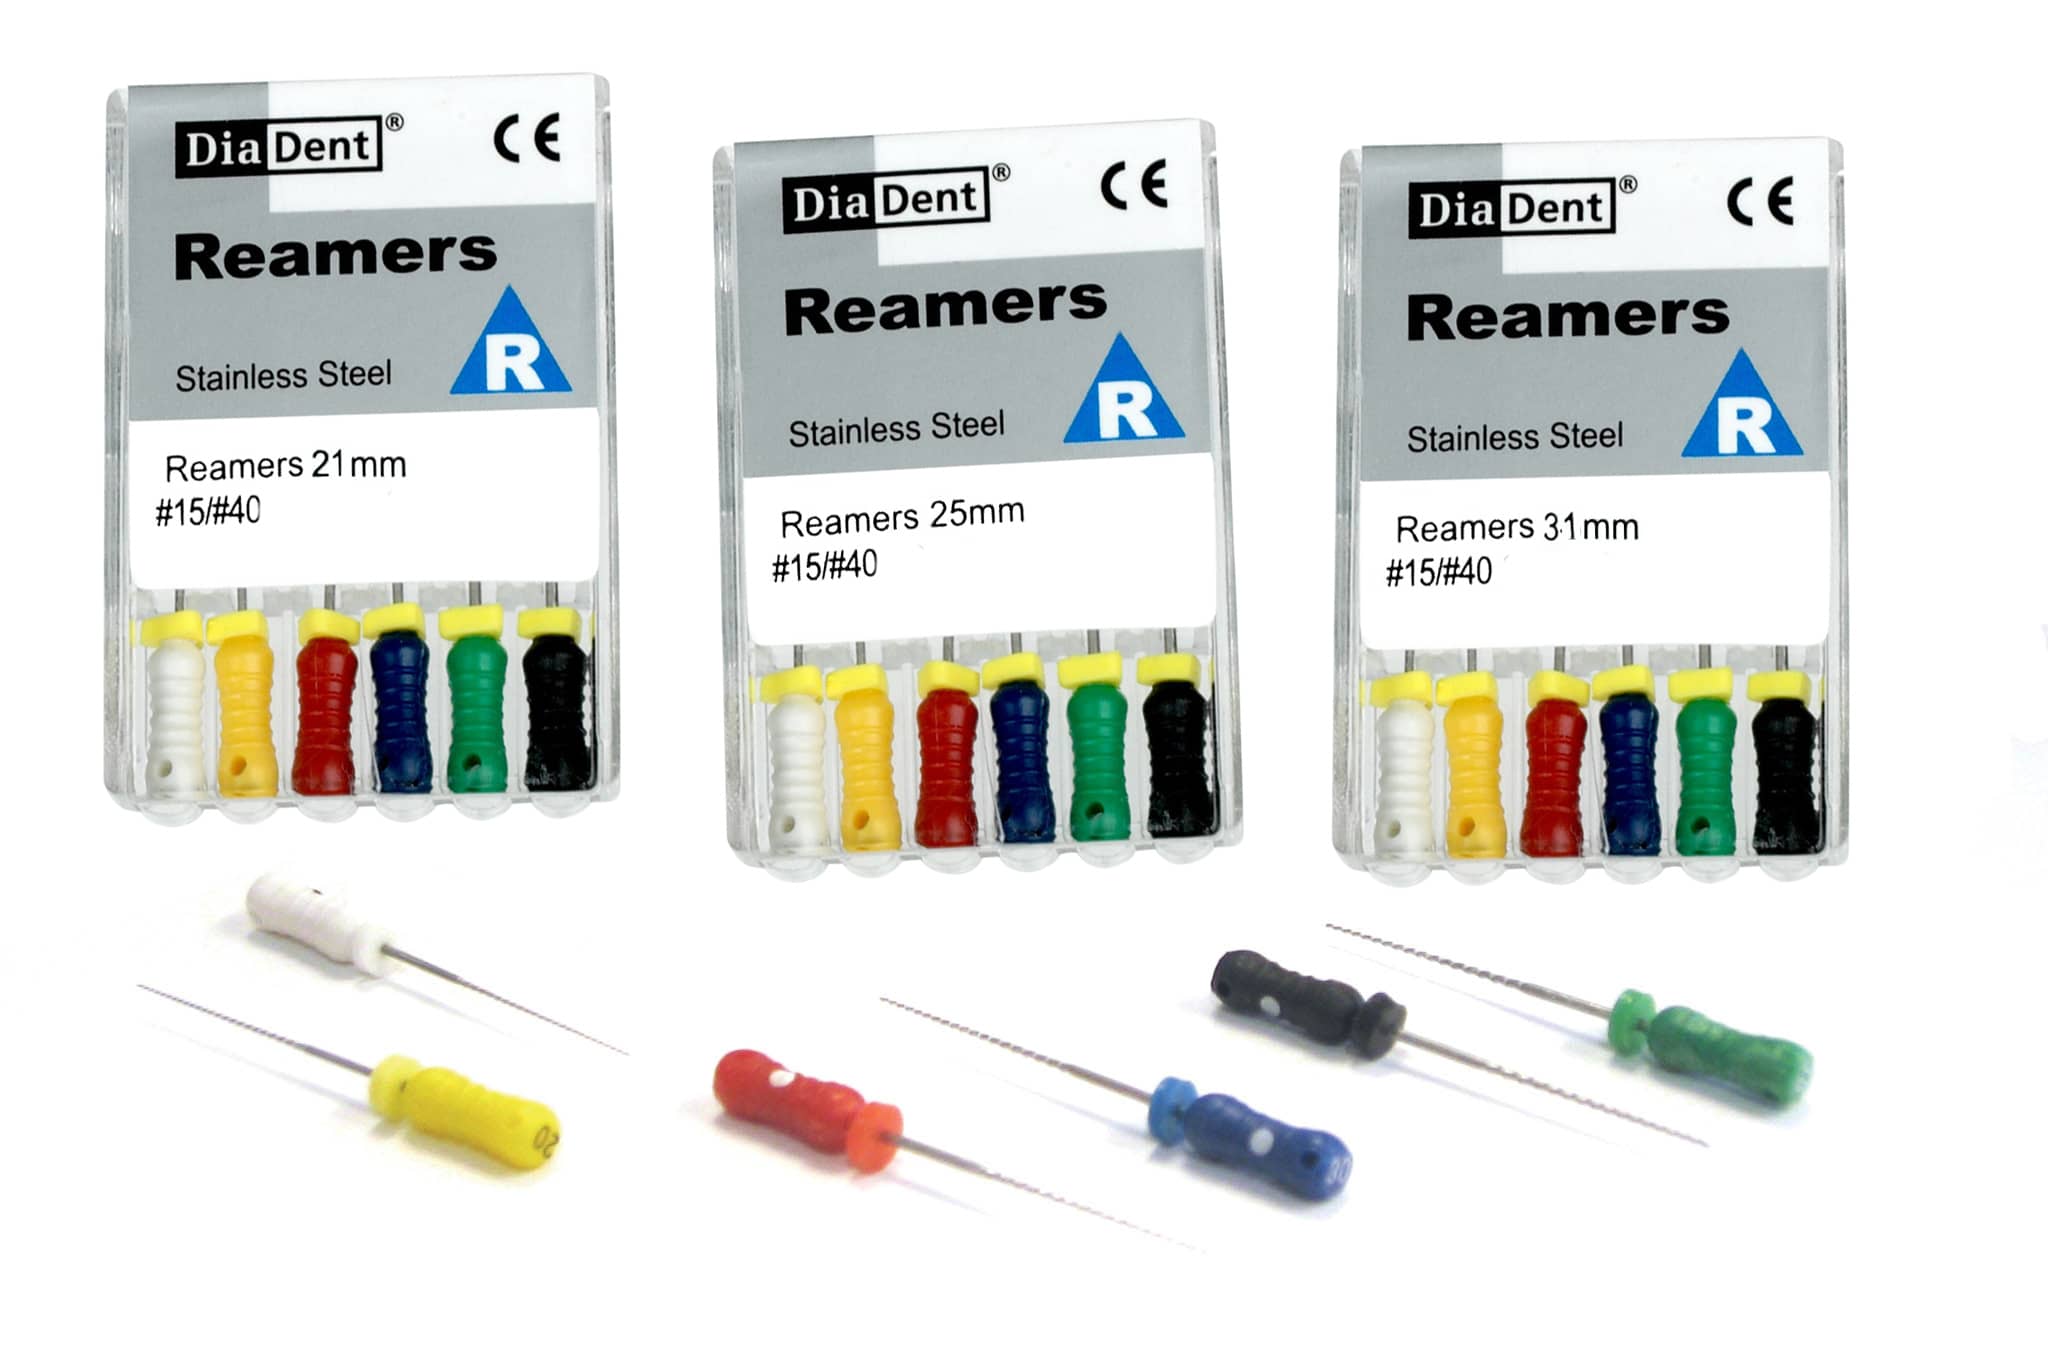 REAMERS Diadent 31mm - 10